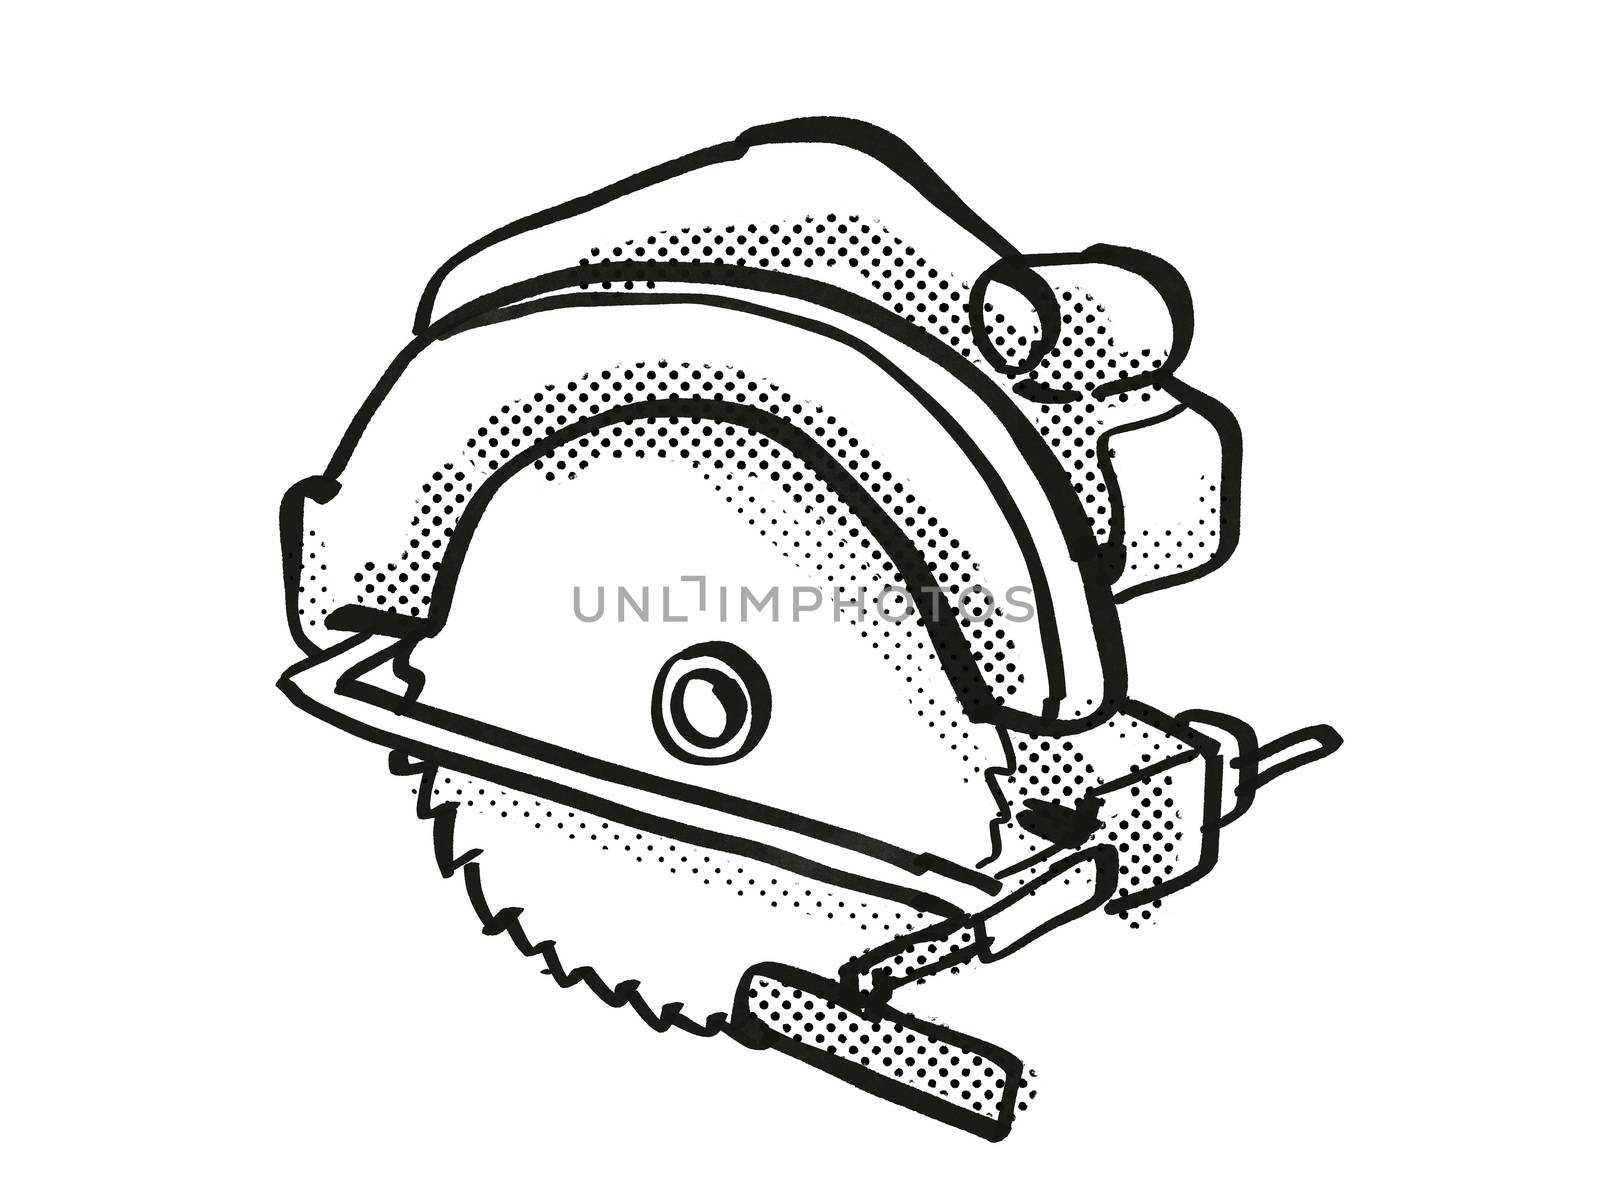 Retro cartoon style drawing of a Circular Saw, a power tool or equipment on isolated white background done in black and white.